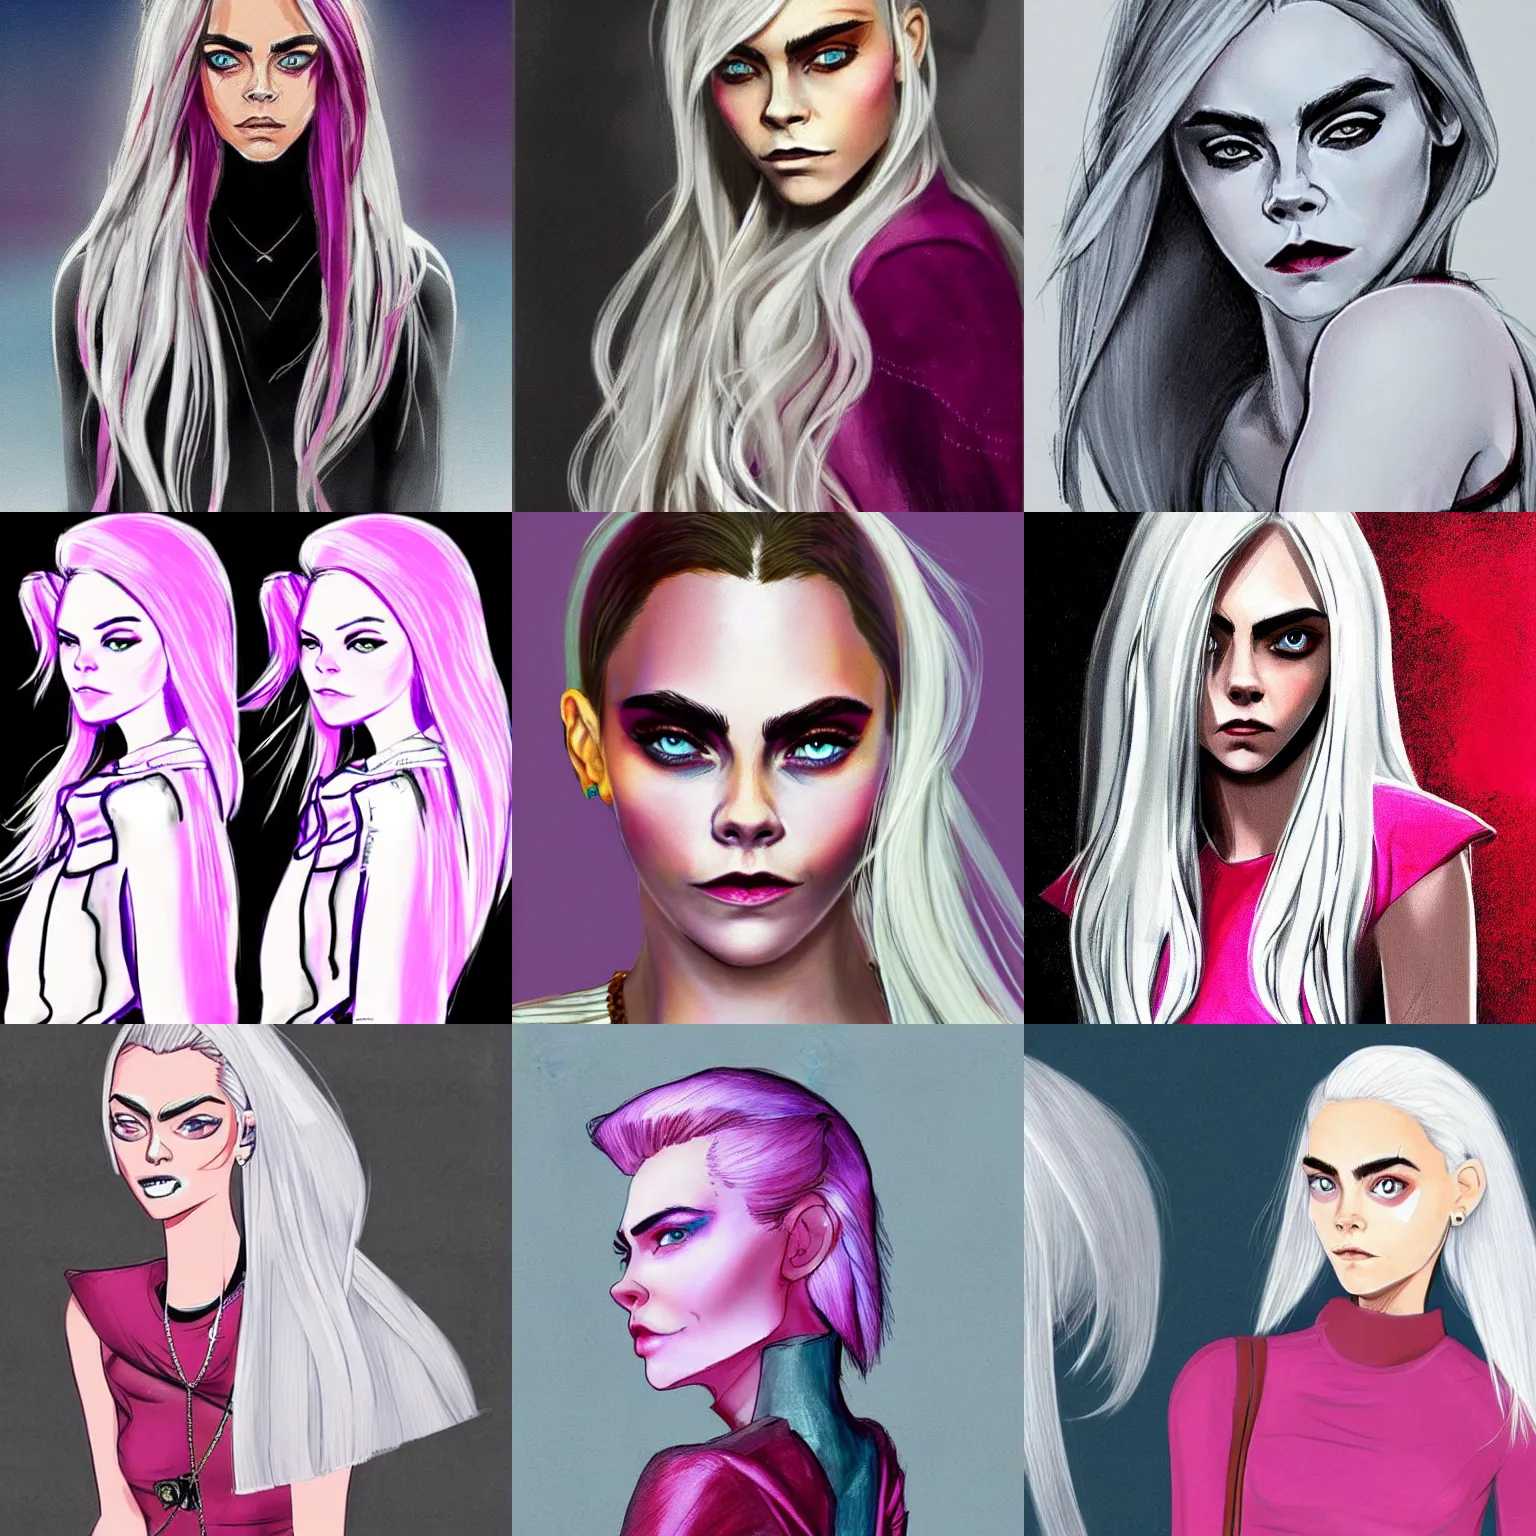 Prompt: Beautiful concept art of a character inspired by Cara Delevigne with white hair wearing a magenta top